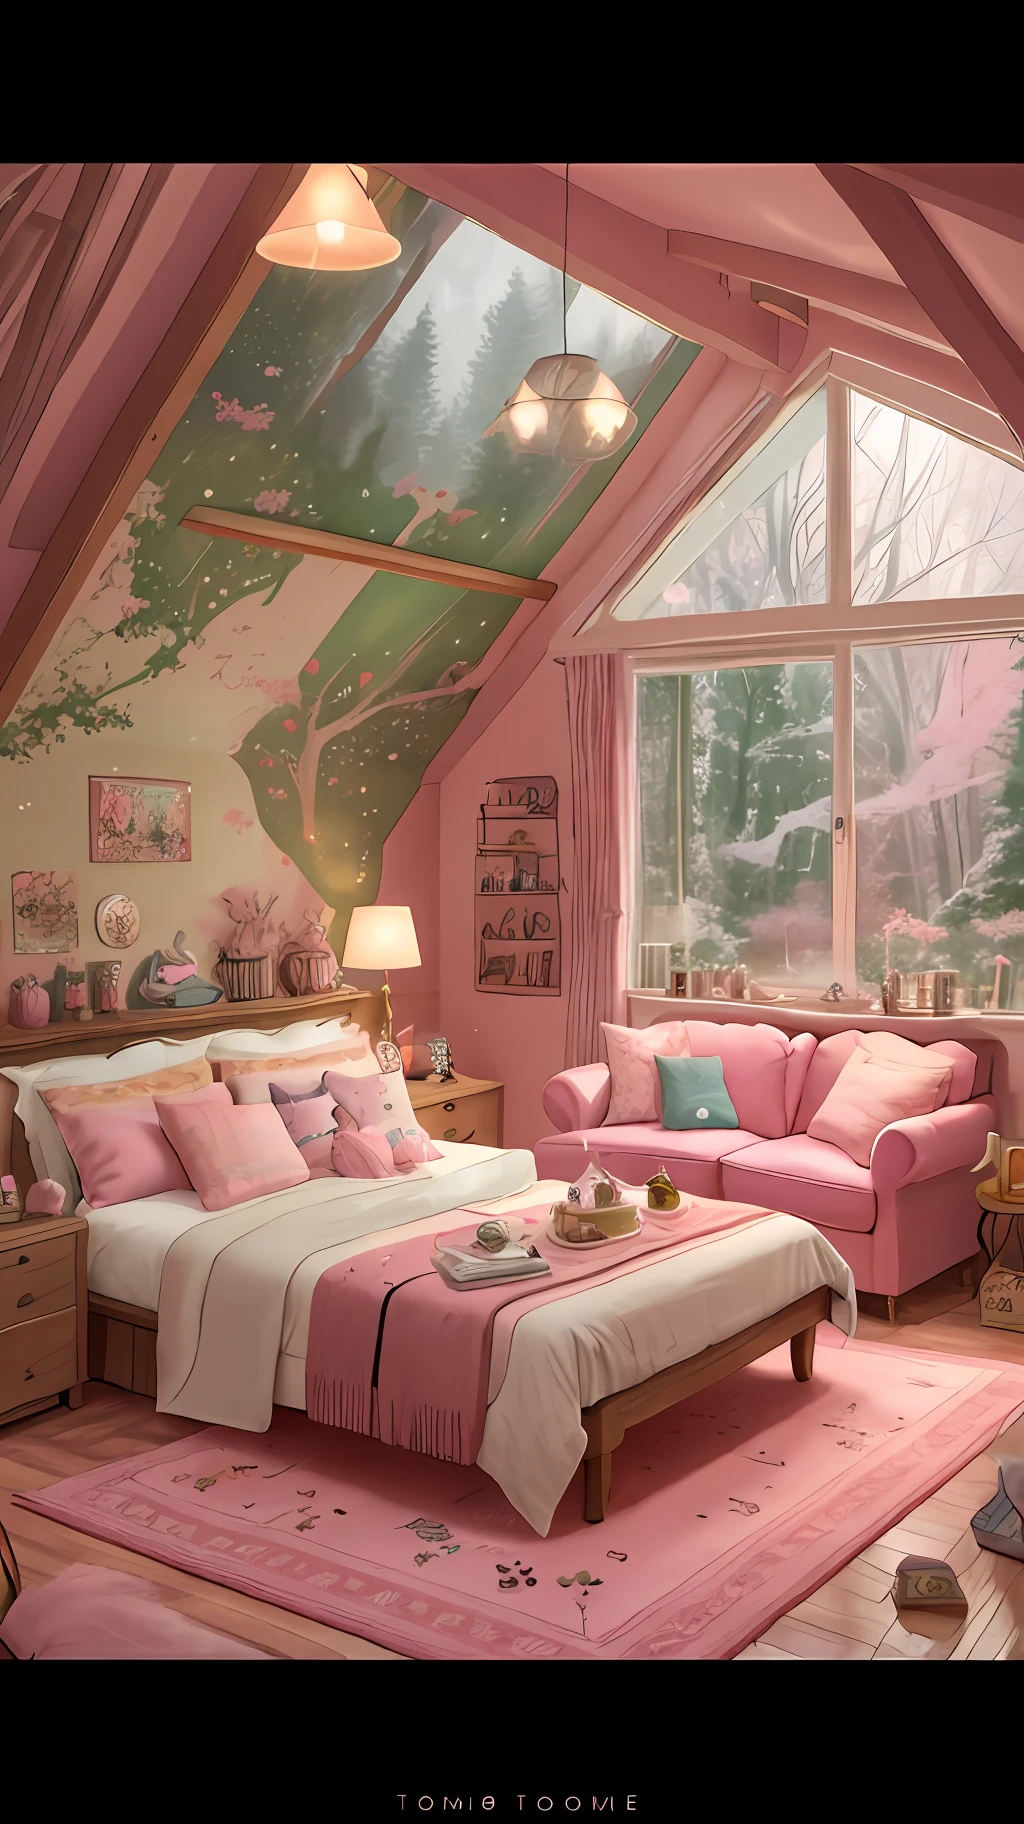 araffe room with a pink rug and a pink couch, in a candy land style house, brightly lit pink room, dreamy aesthetic, cozy aesthetic, cozy place, thomas kinkade. cute cozy room, soothing and cozy landscape, pink forest, cottagecore!!, cozy home background, with soft pink colors, cozy room, designed for cozy aesthetics!